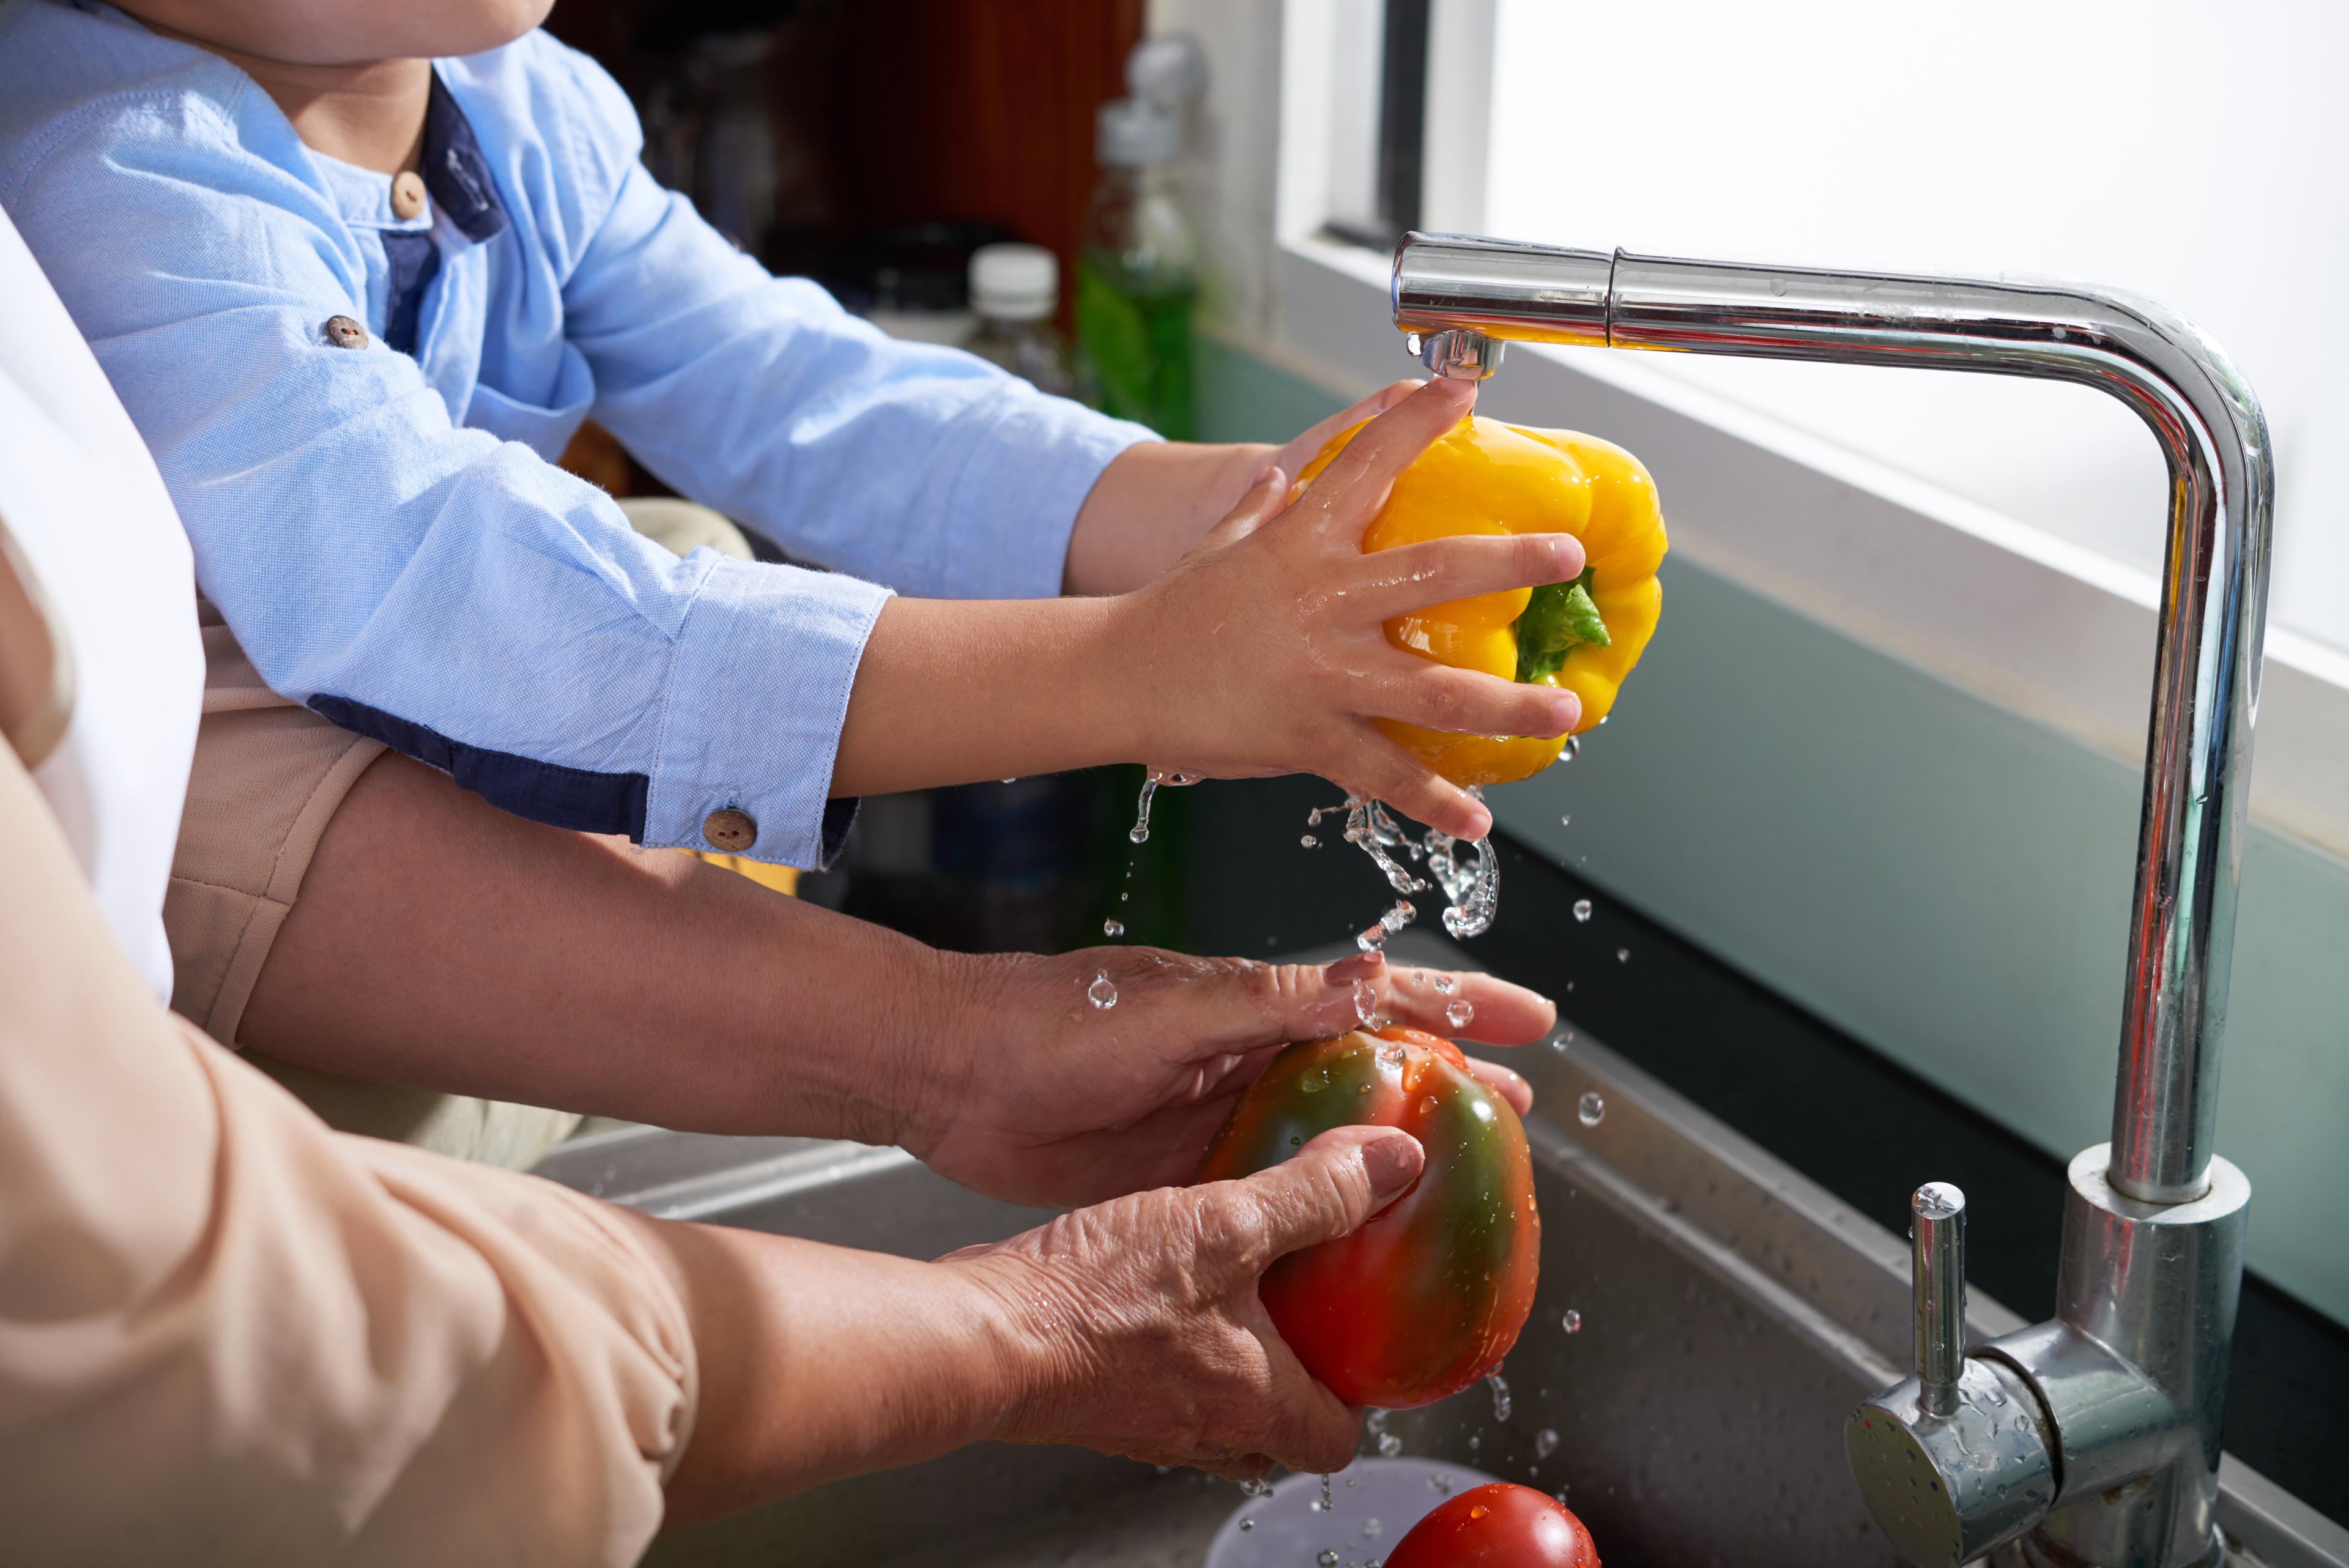 Washing bell peppers in the sink.